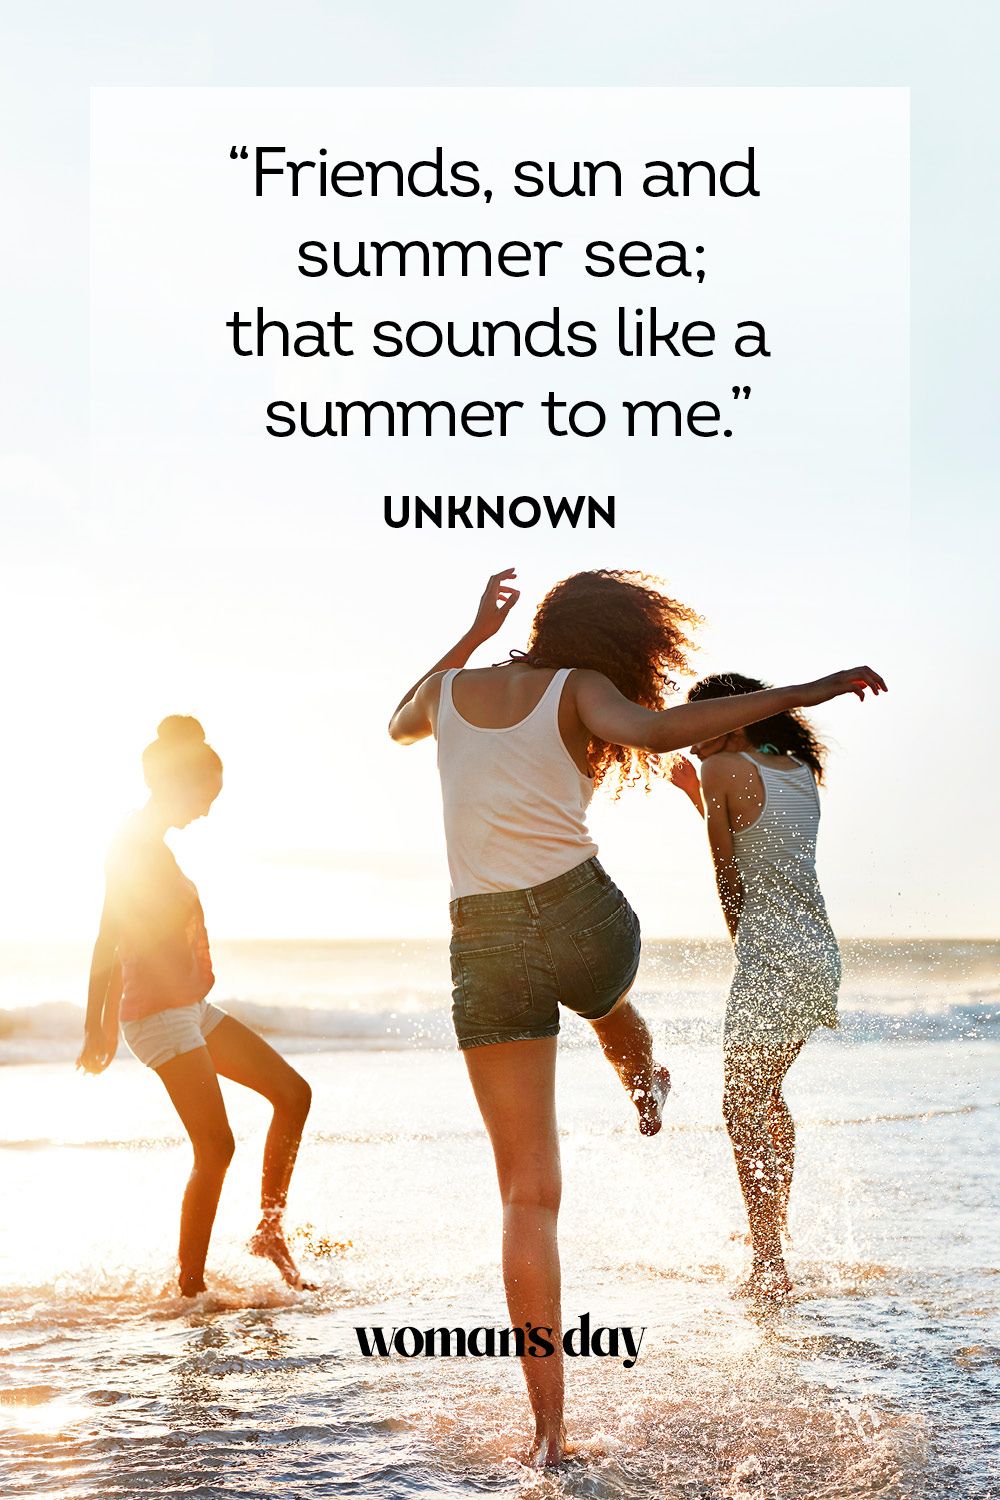 39 Best Summer Quotes 2021 - Famous and Happy Quotes about Summertime